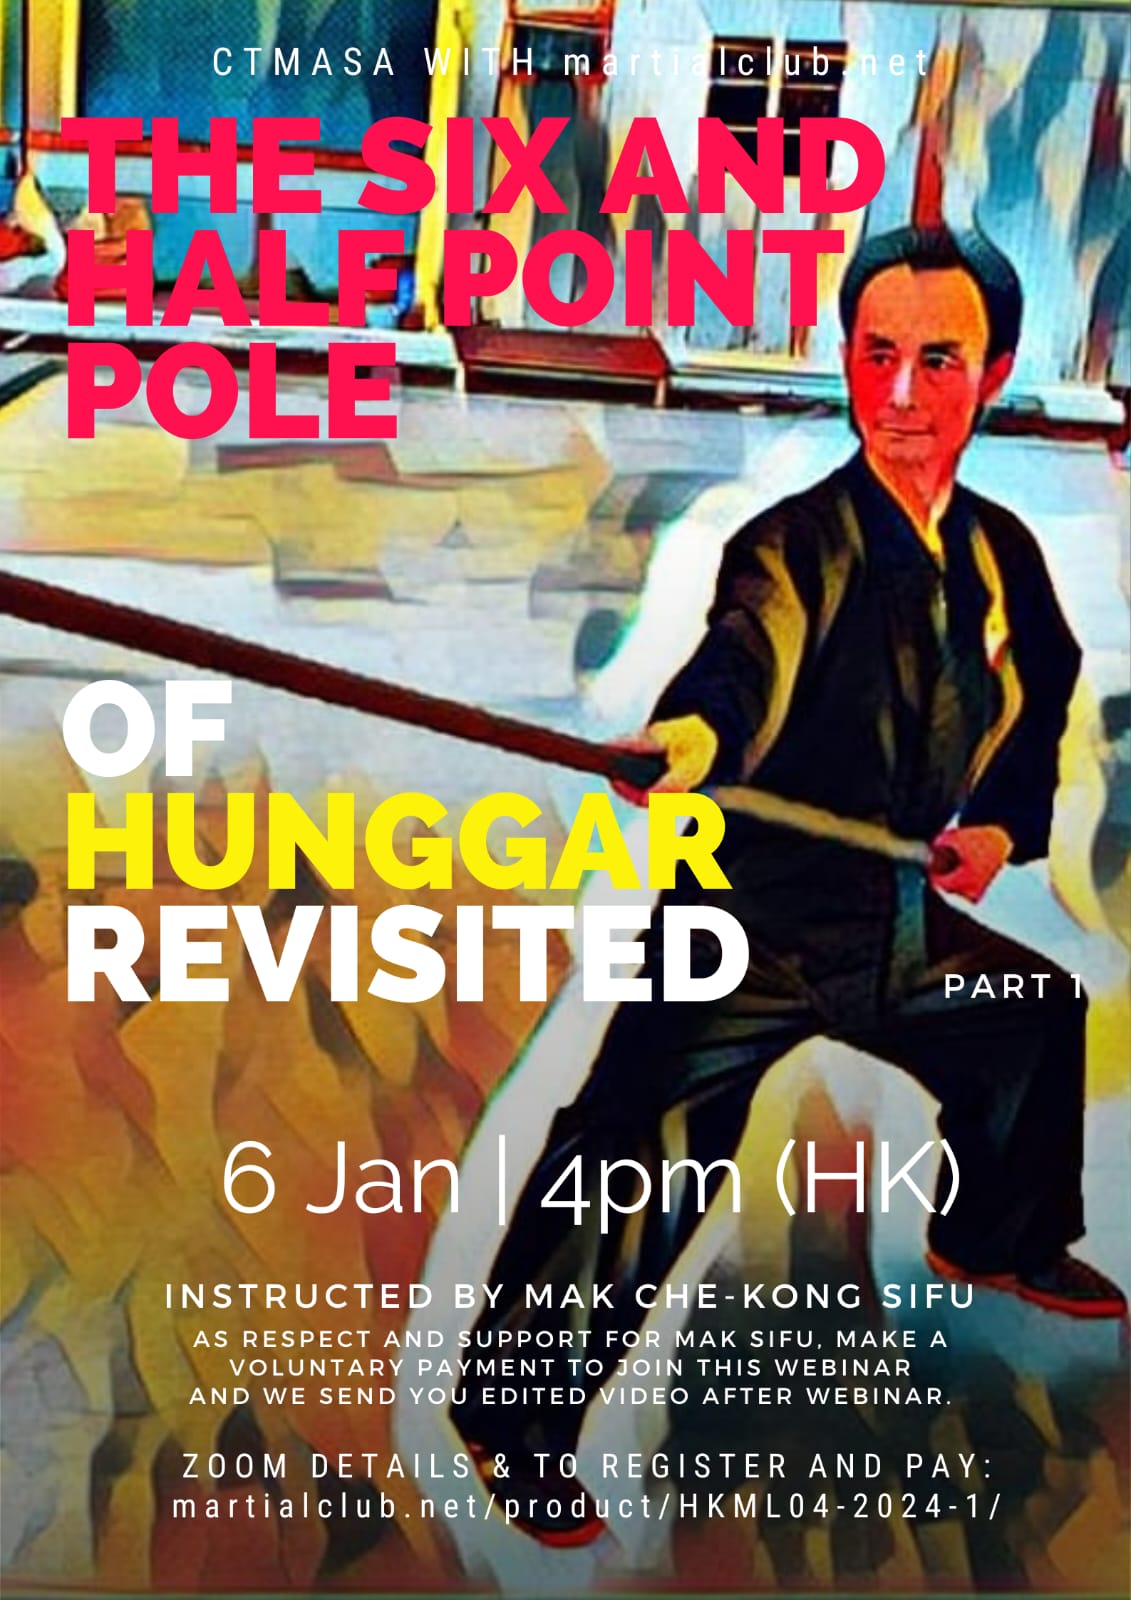 Six & A Half Point Pole of Hung Gar Revisited Part 1